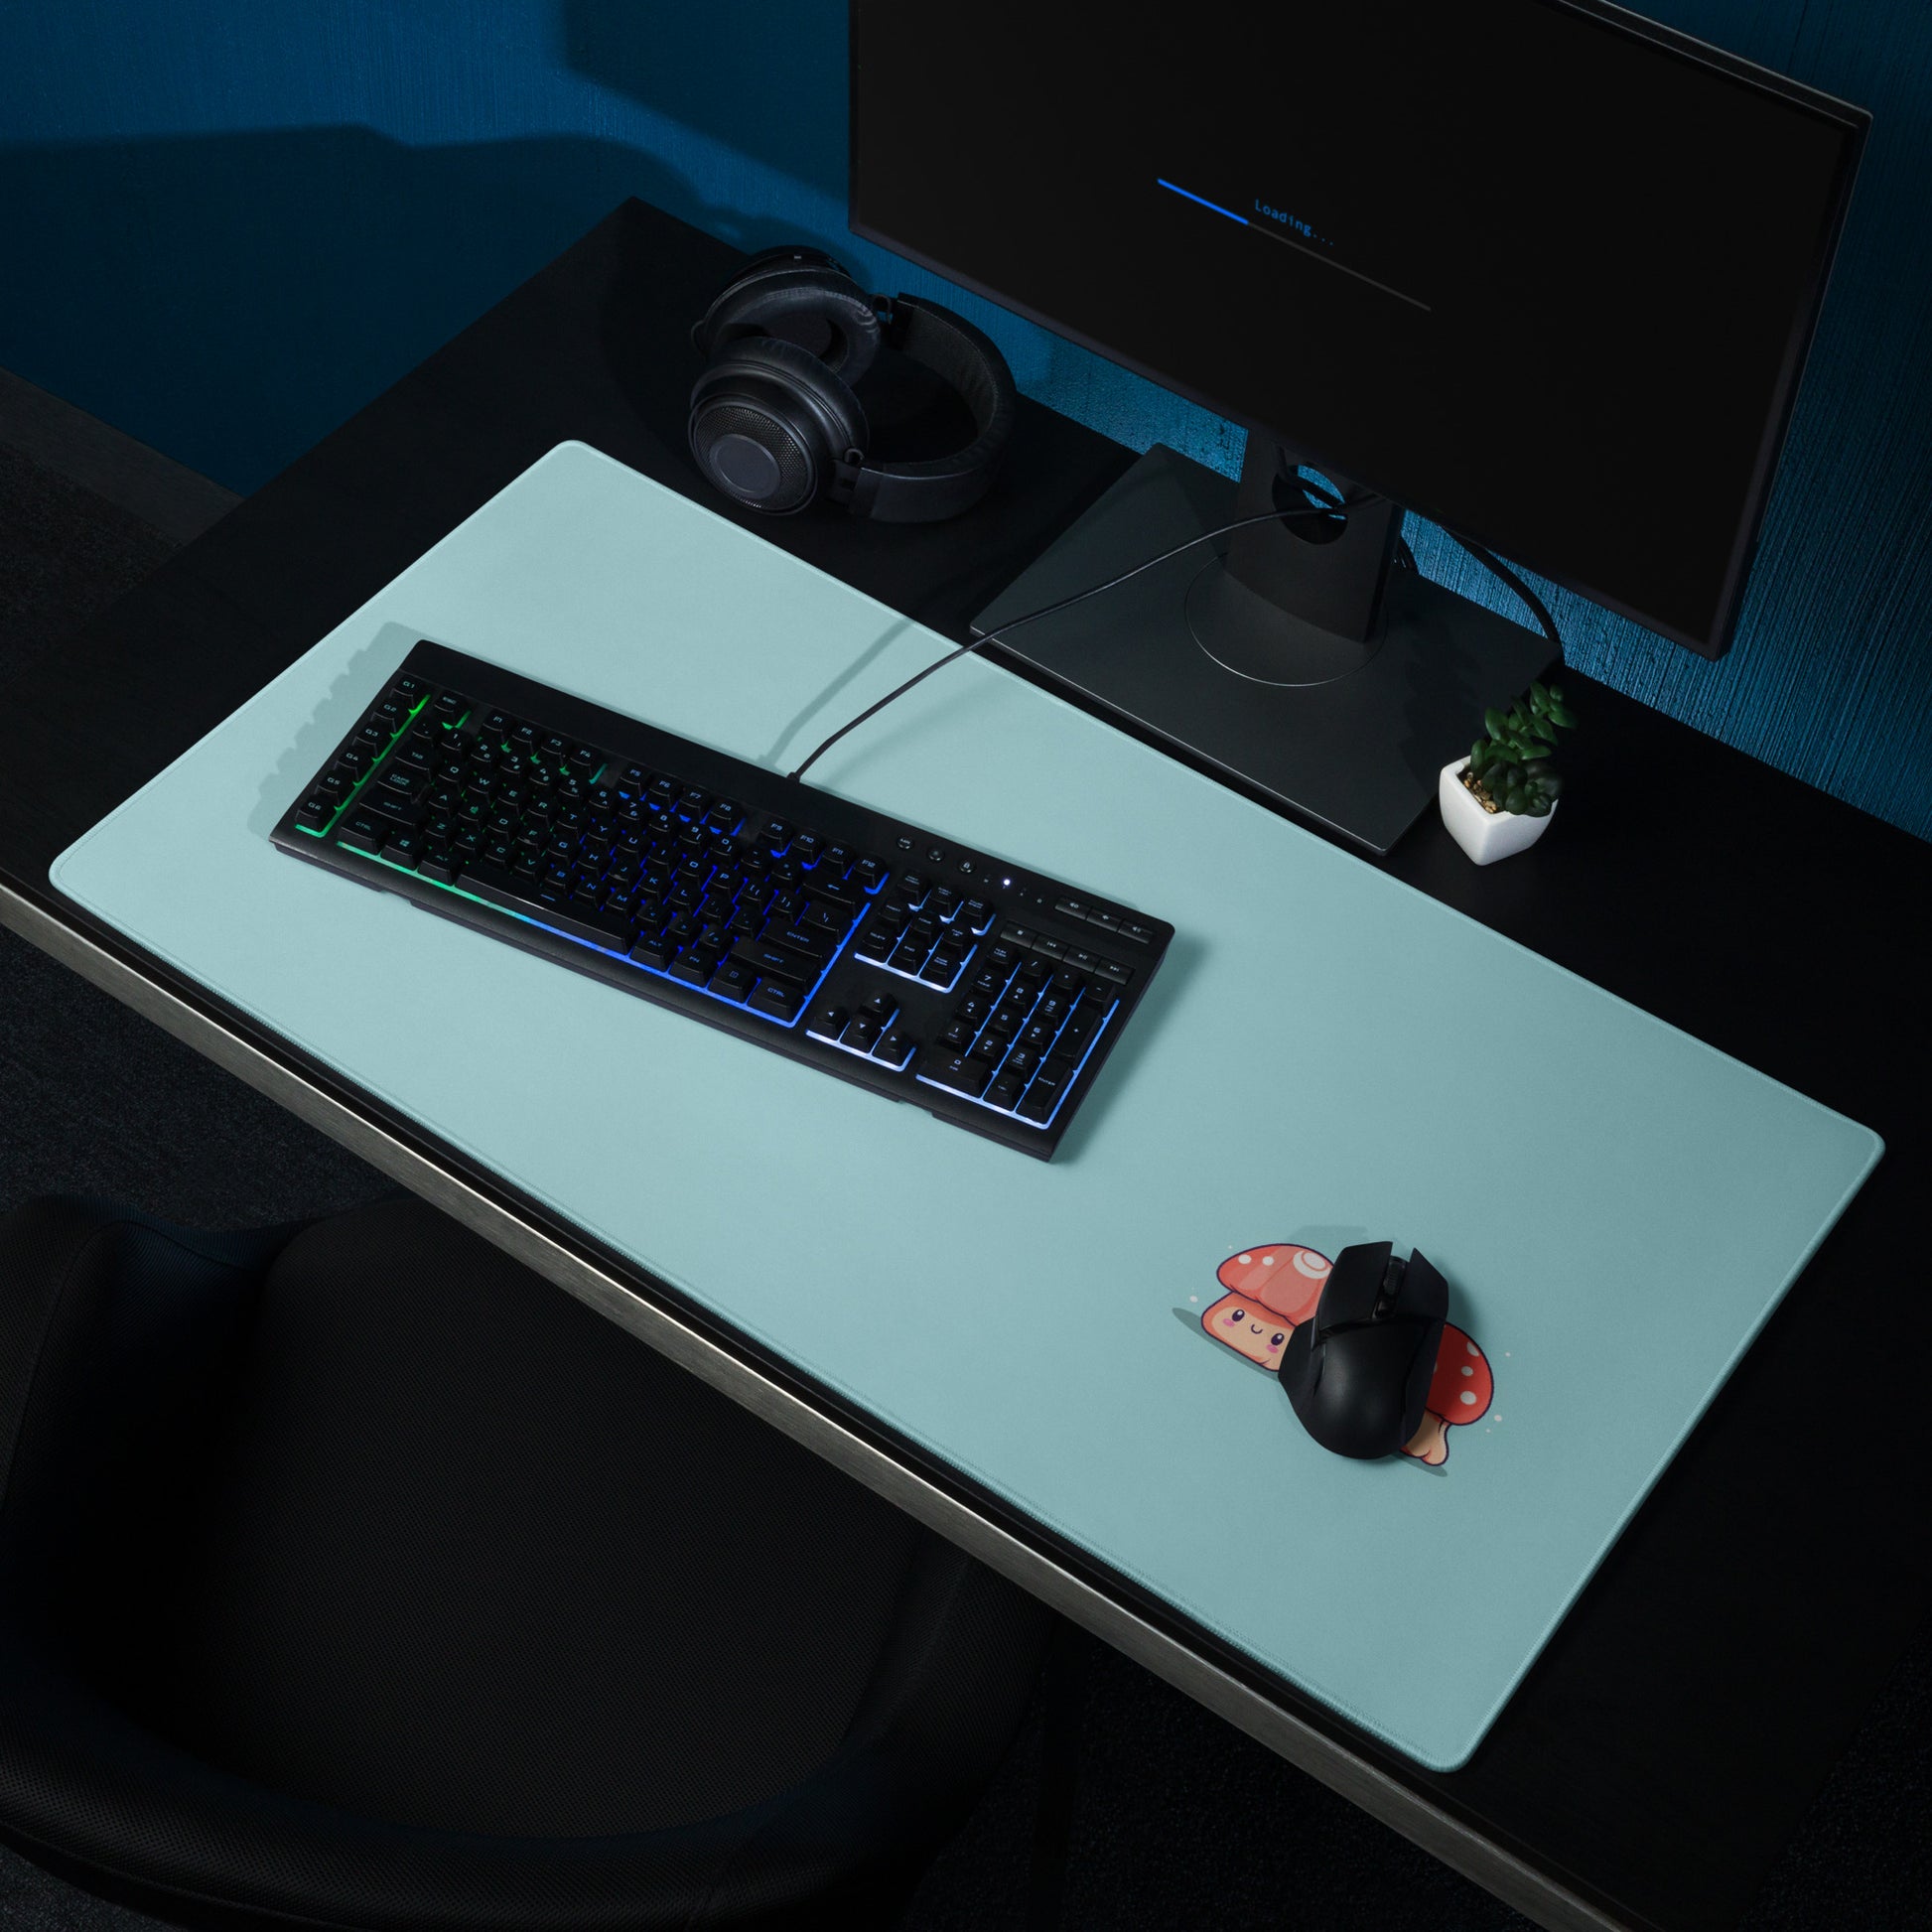 A gaming desk pad with two kawaii mushrooms on a blue background. A keyboard and mouse sit on top of it.